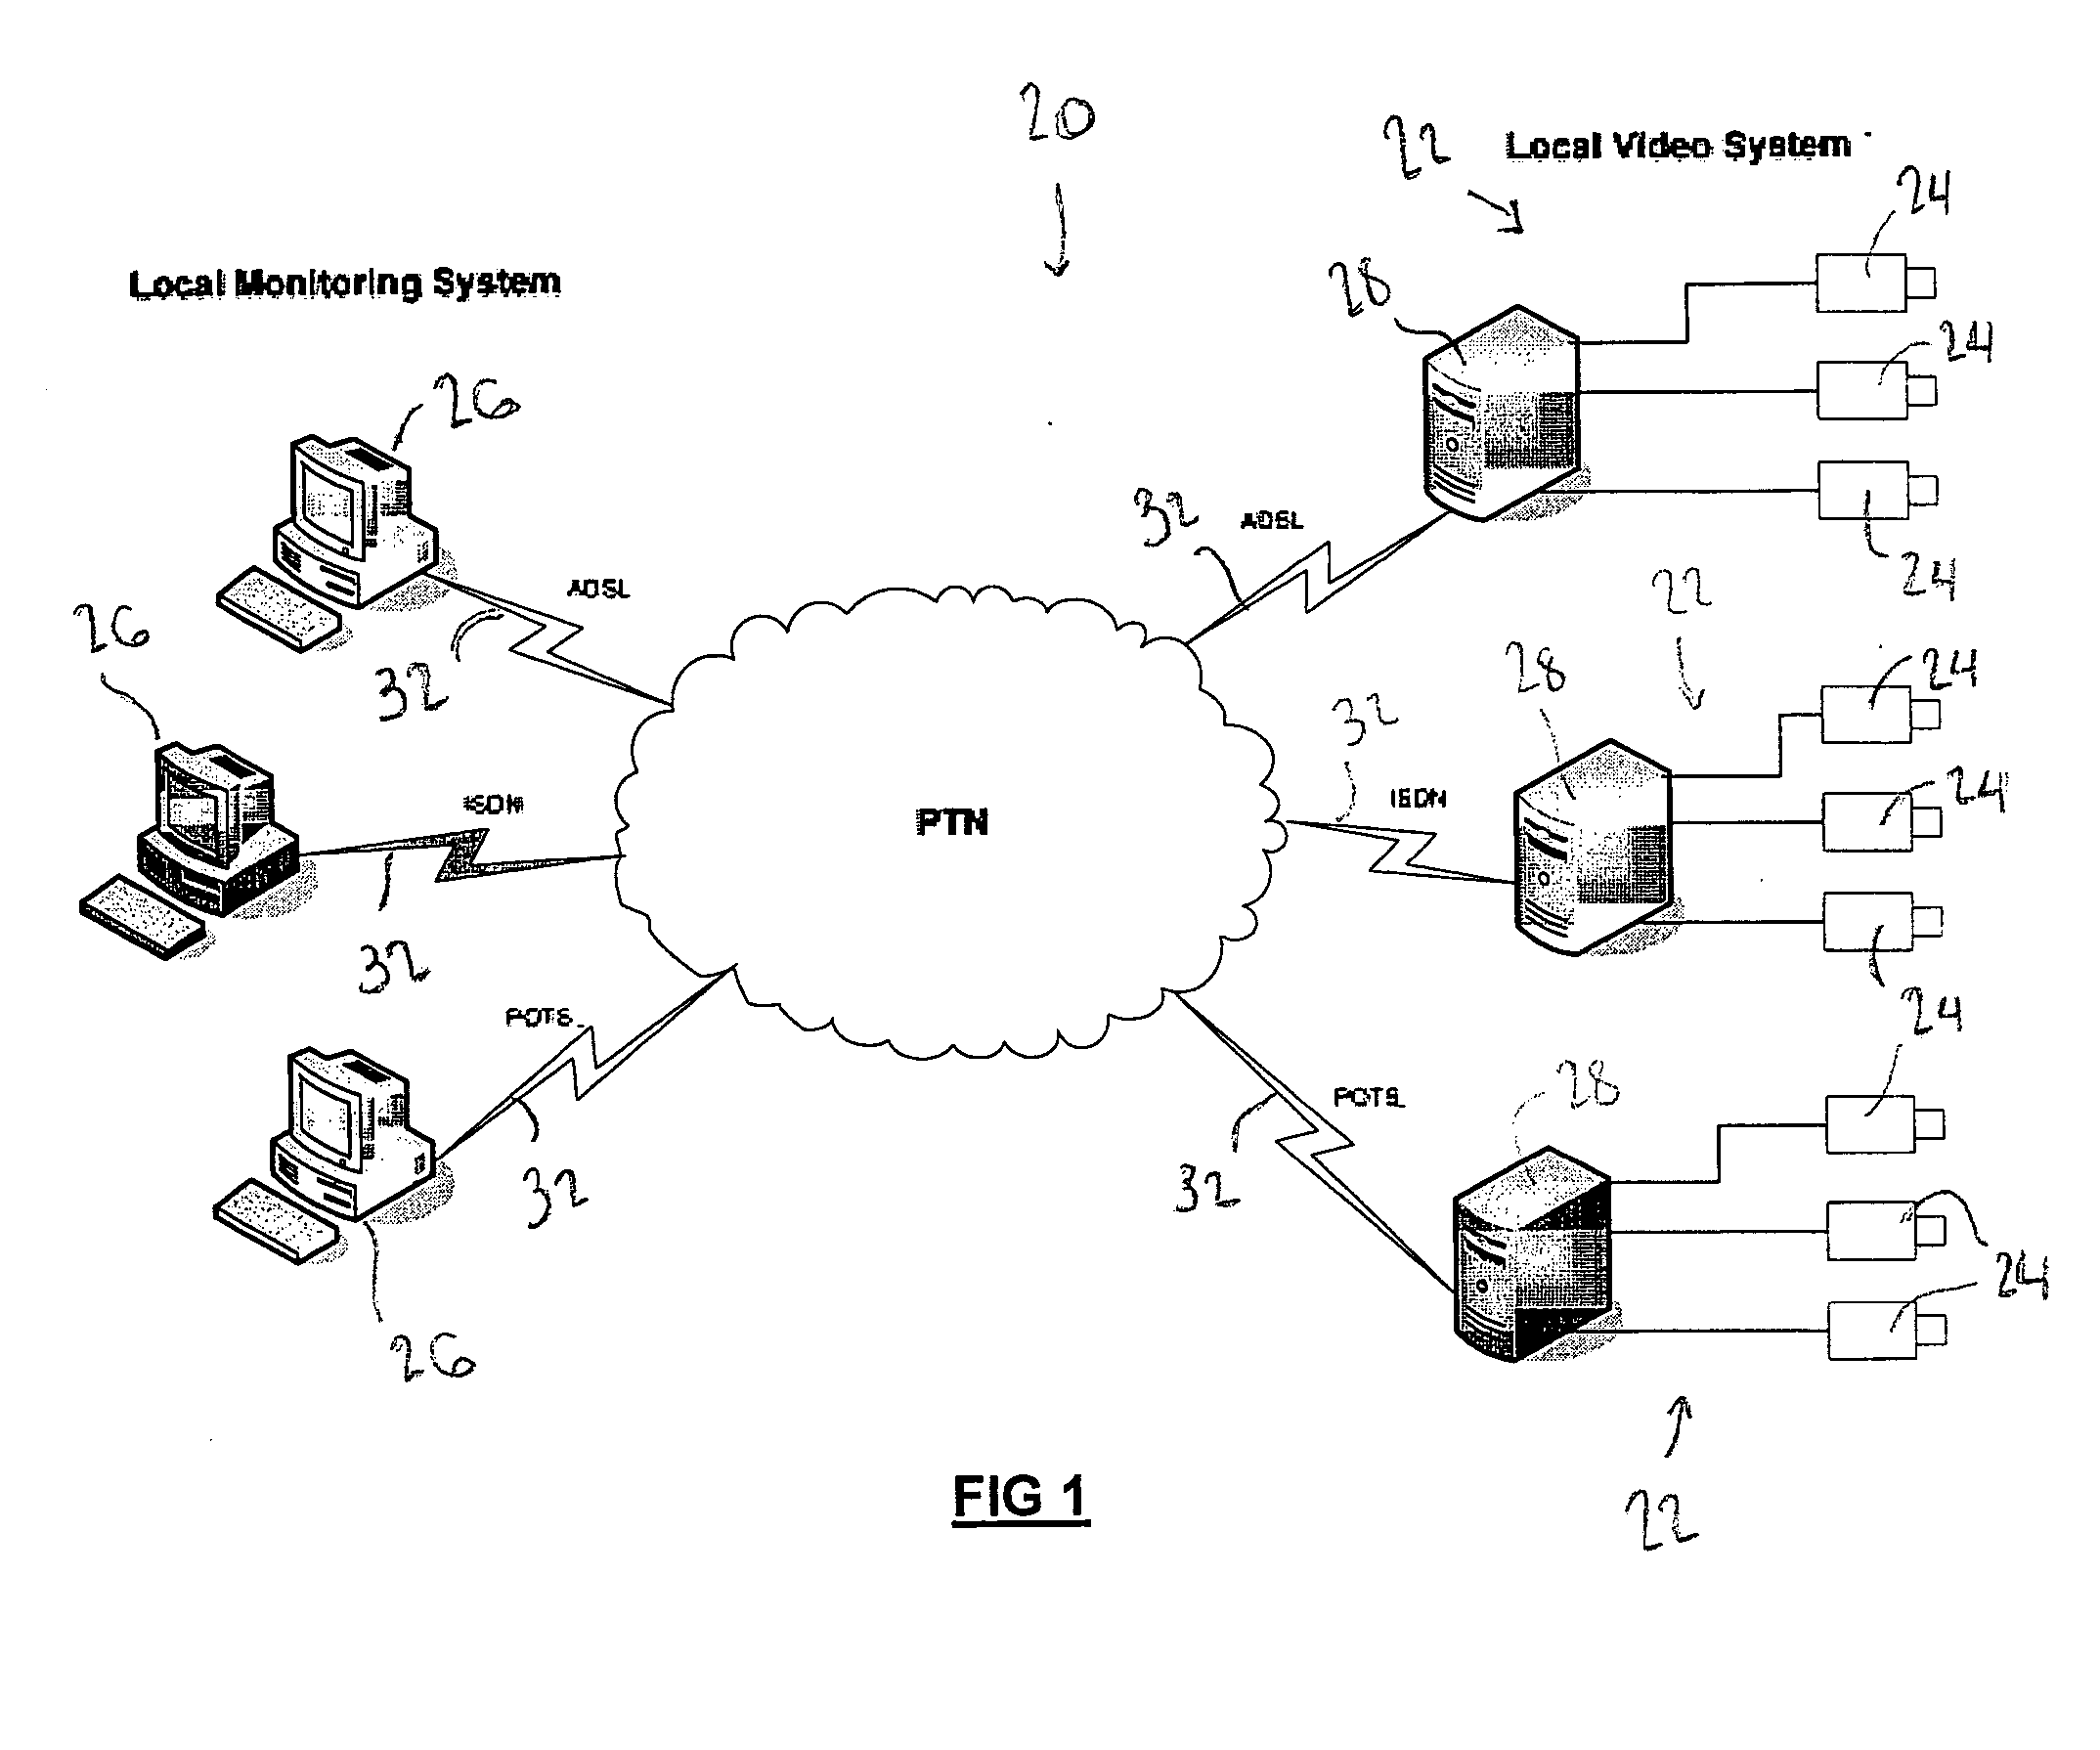 System and method for the automated, remote diagnostic of the operation of a digital video recording network